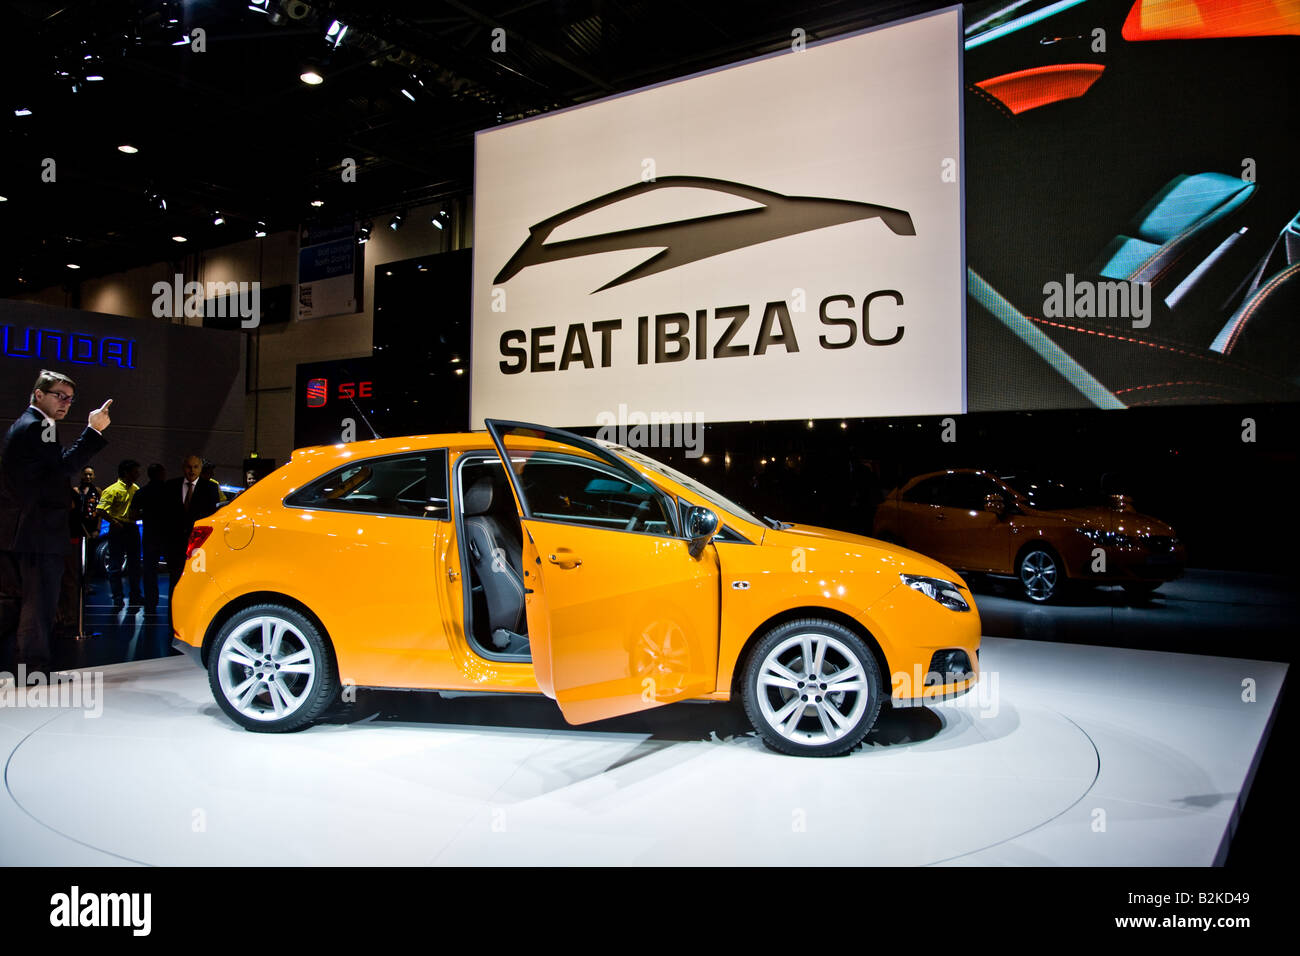 Launch of the Seat Ibiza Sports Coupe at the London Motor show The excel Centre photo Malcolm Case Green Stock Photo